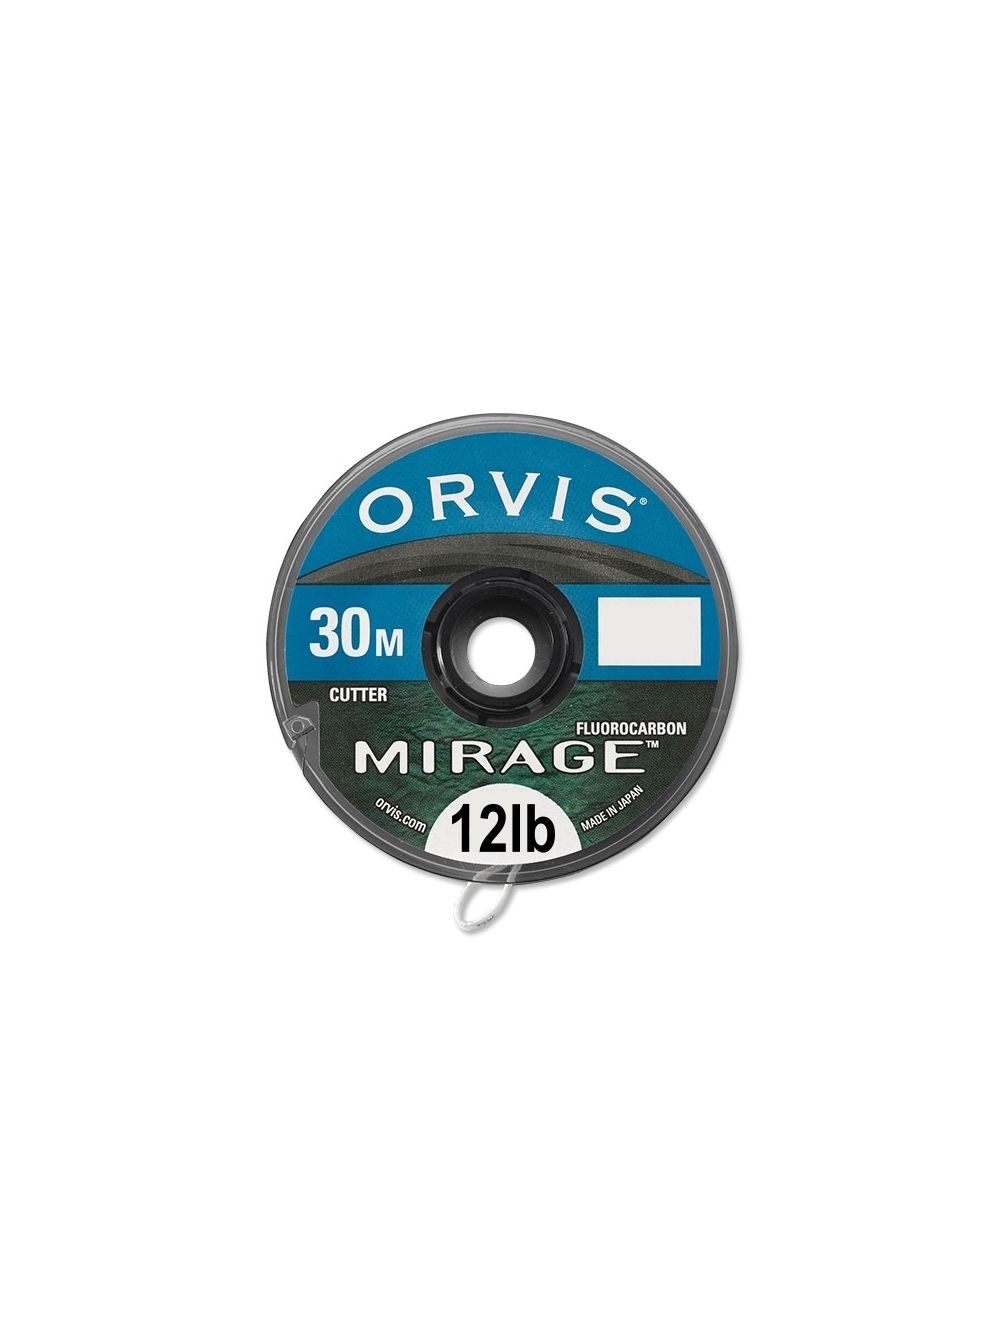 Orvis Mirage Tippet Material 30m Fly Game Fishing All Sizes Available 